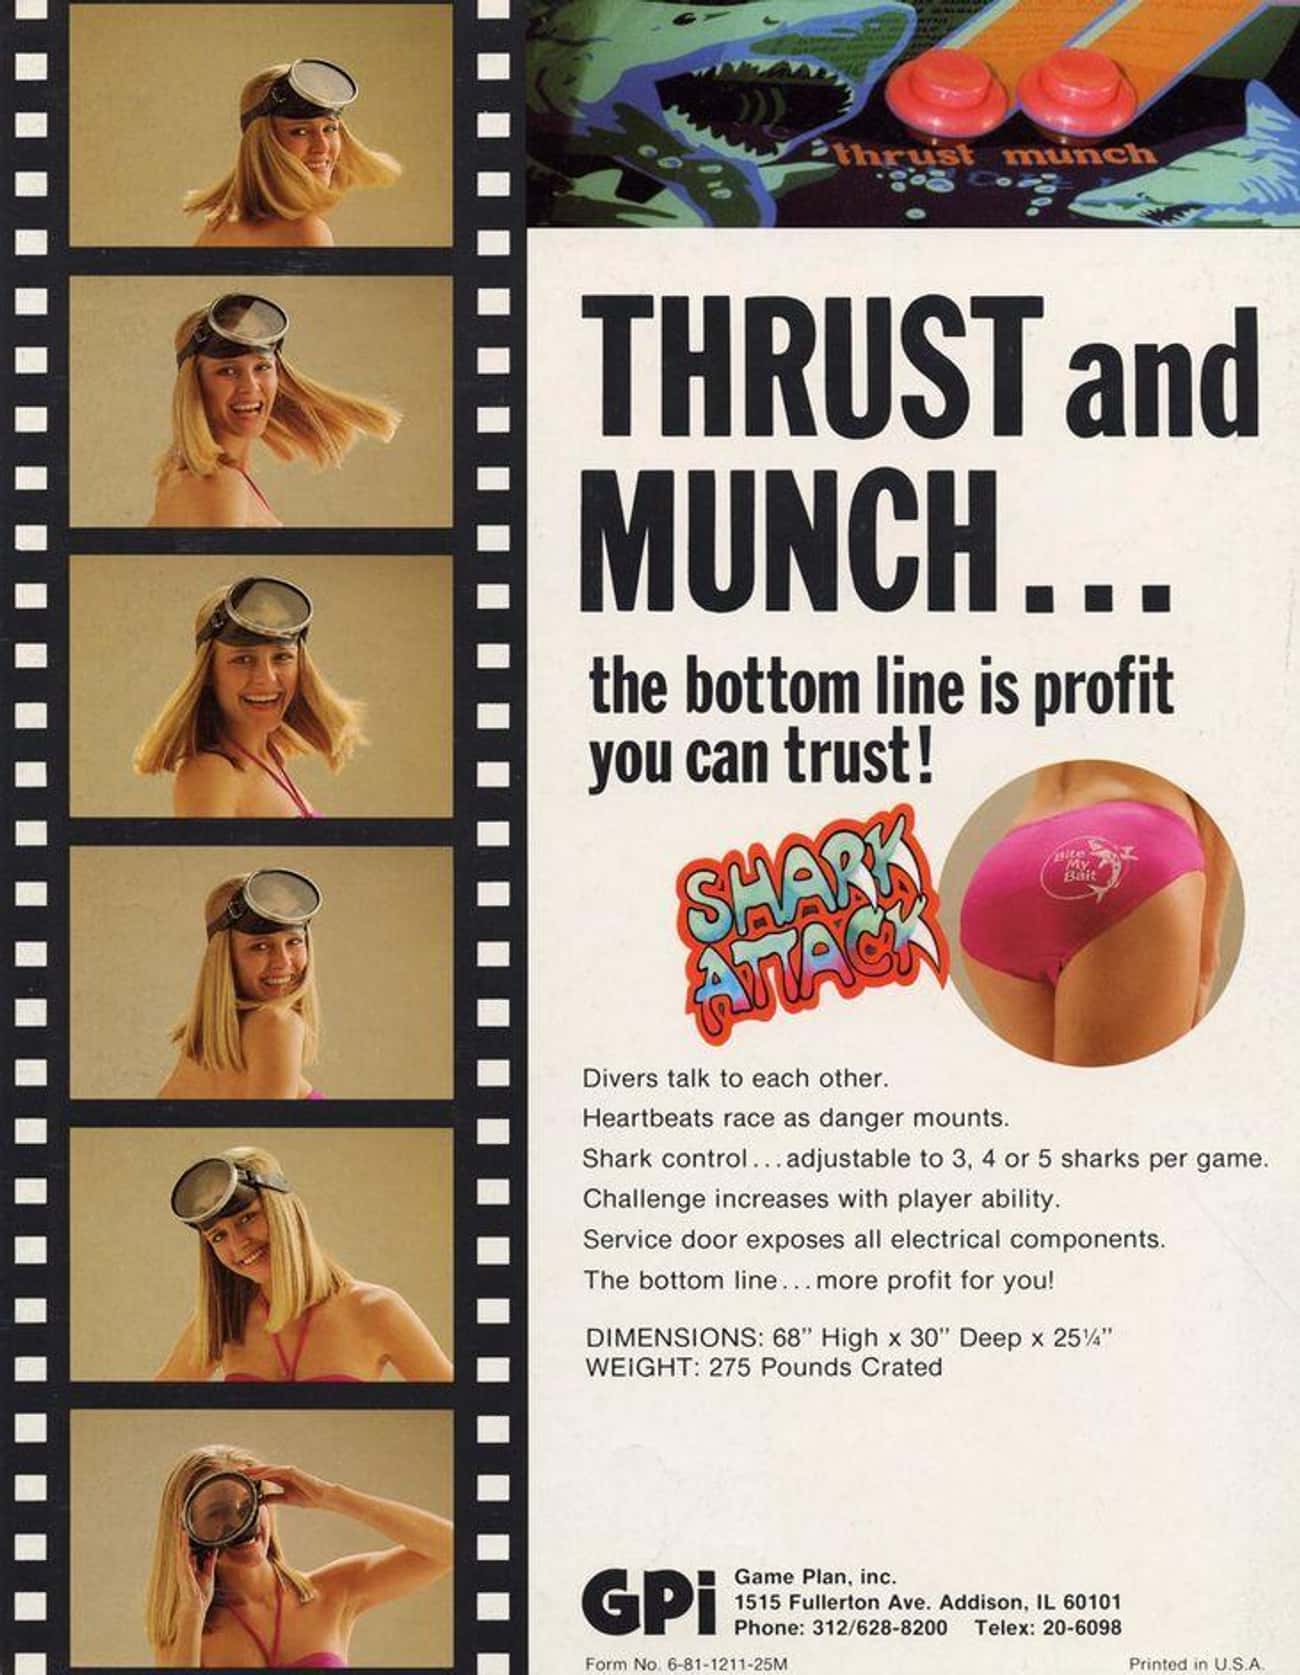 Vintage Gaming Ads - muscle - p thrust munch Co Thrust and Munch... the bottom line is profit you can trust! halte Shark Attack Divers talk to each other. Heartbeats race as danger mounts. Shark control...adjustable to 3, 4 or 5 sharks per game. Challenge